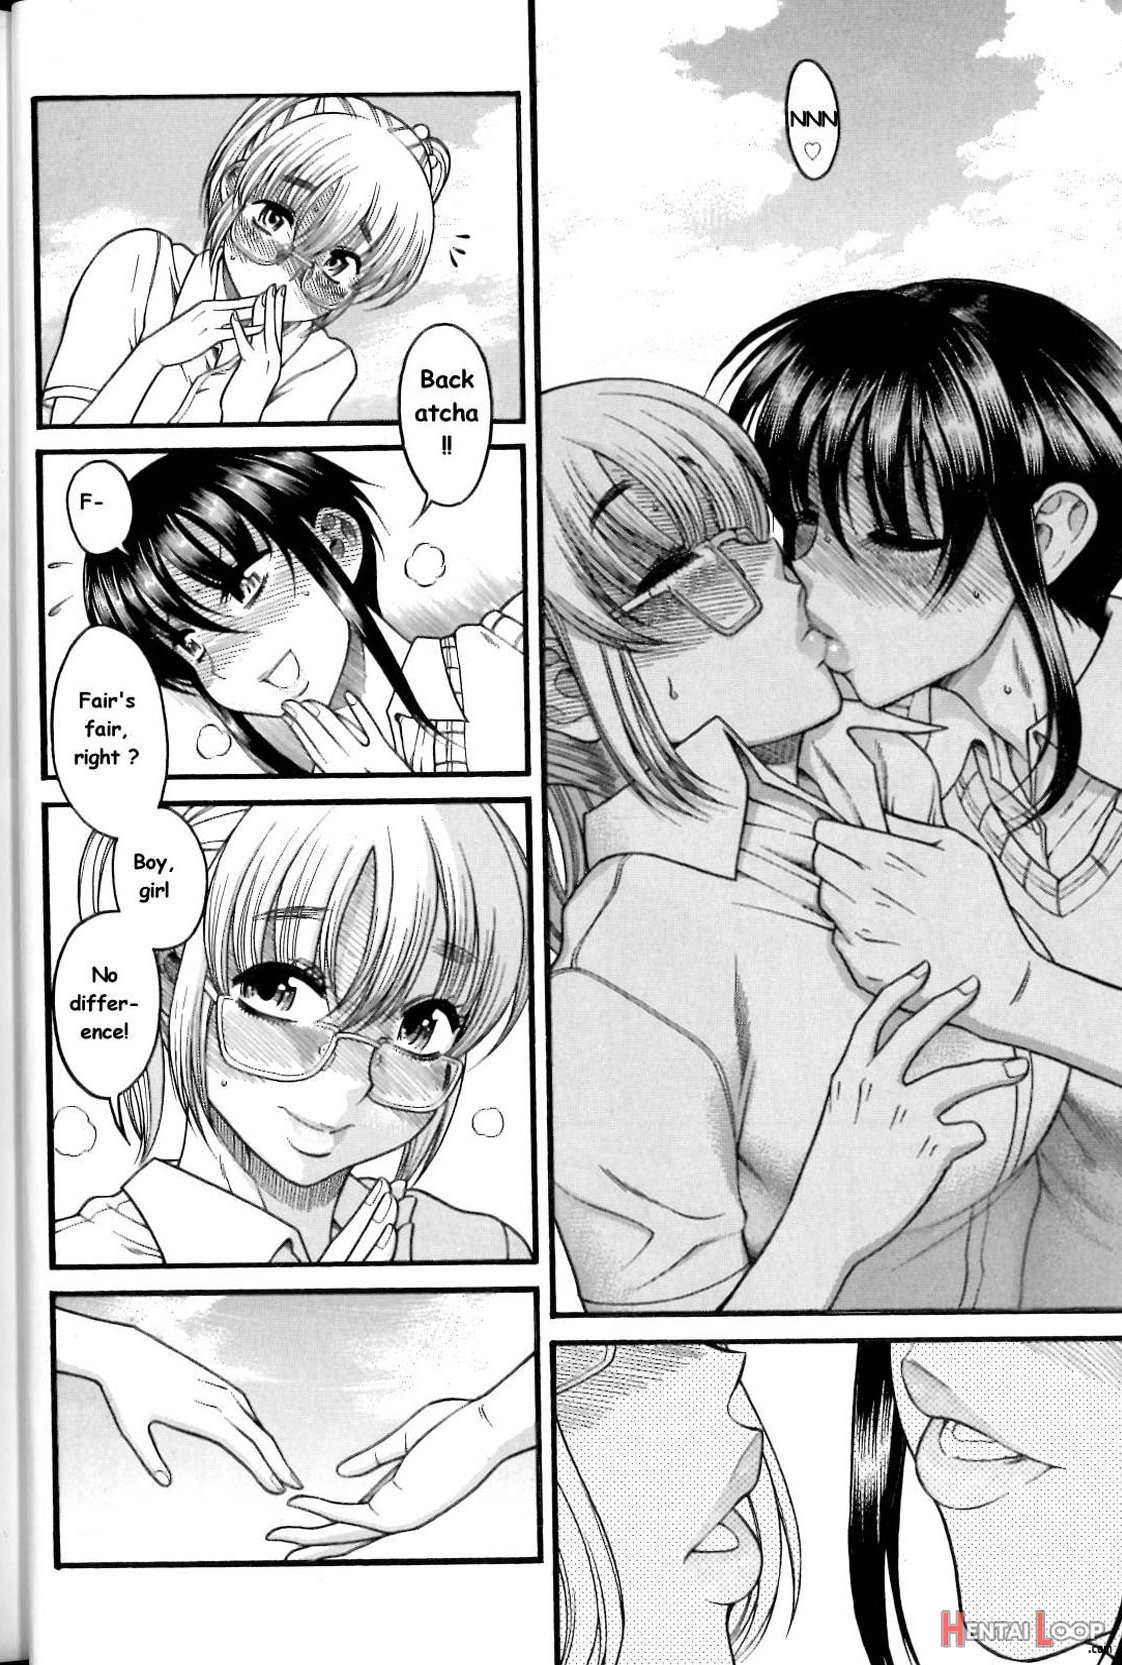 Boy Meets Girl, Girl Meets Boy 2- Single Page Version page 24